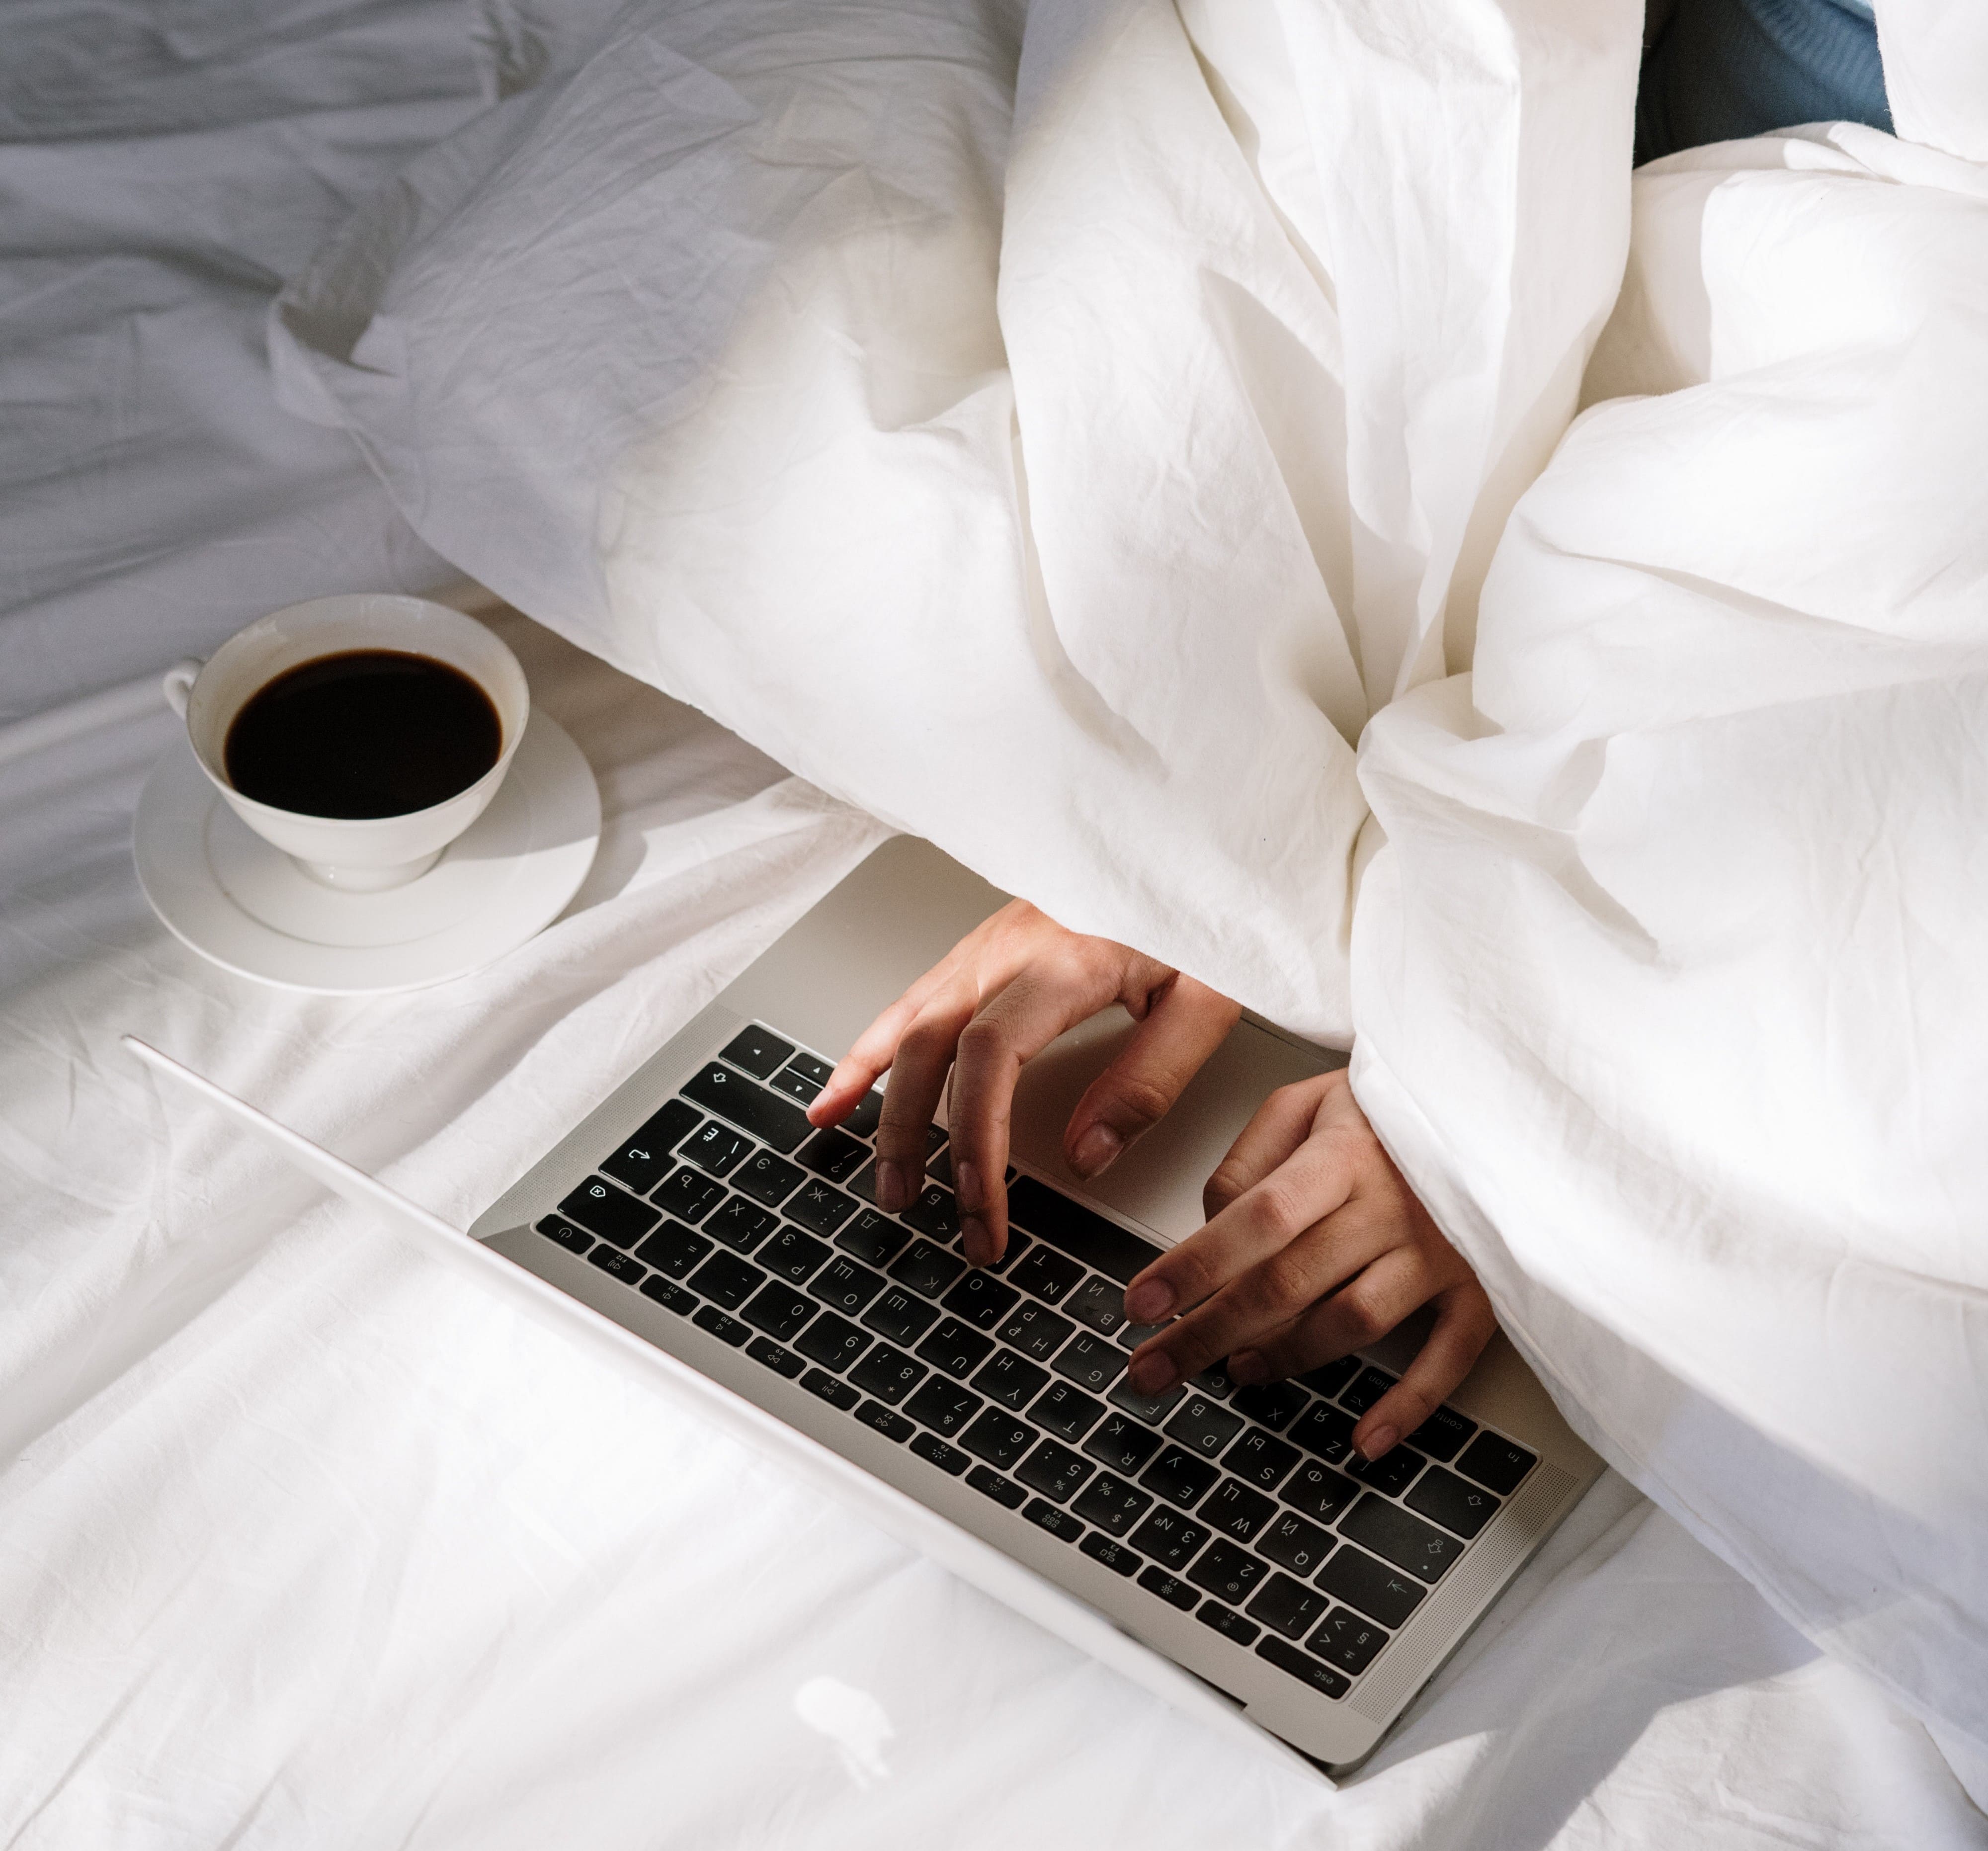 working from bed under the blanket with a coffee cup on the mattress